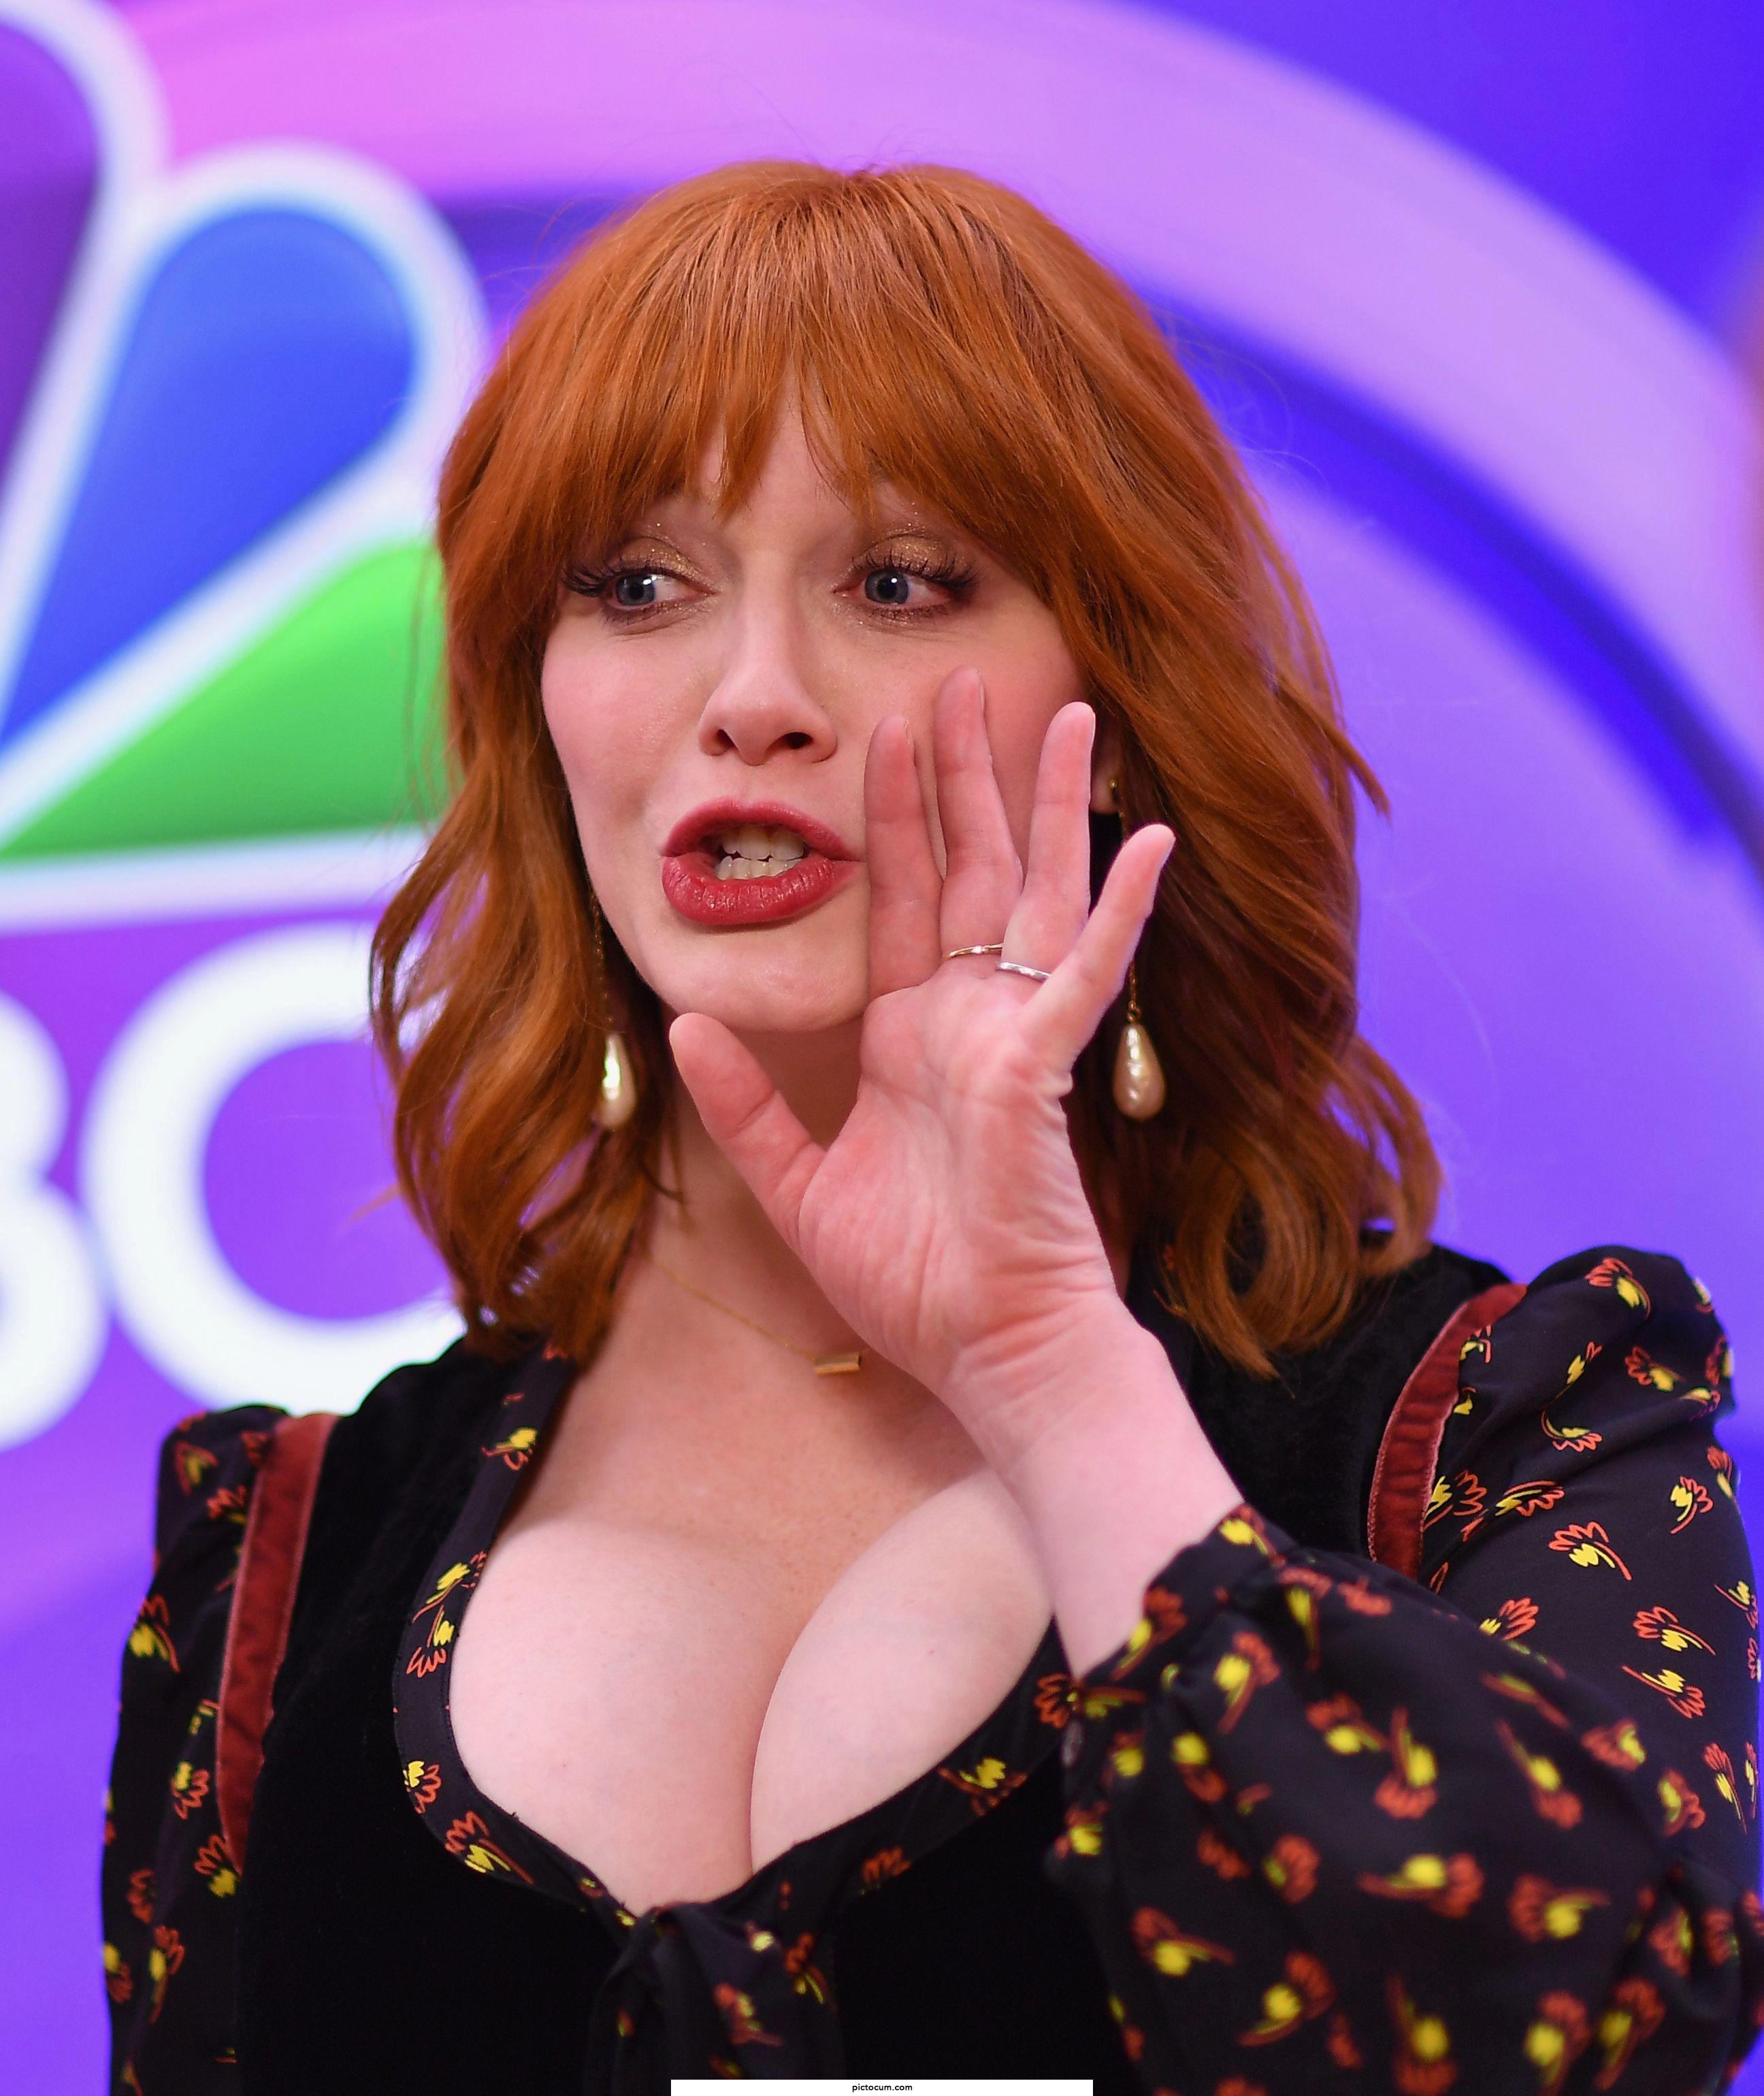 Want Christina Hendricks to bent over a chair, so that her meatbags sway rapidly as I ram her from behind roughly.